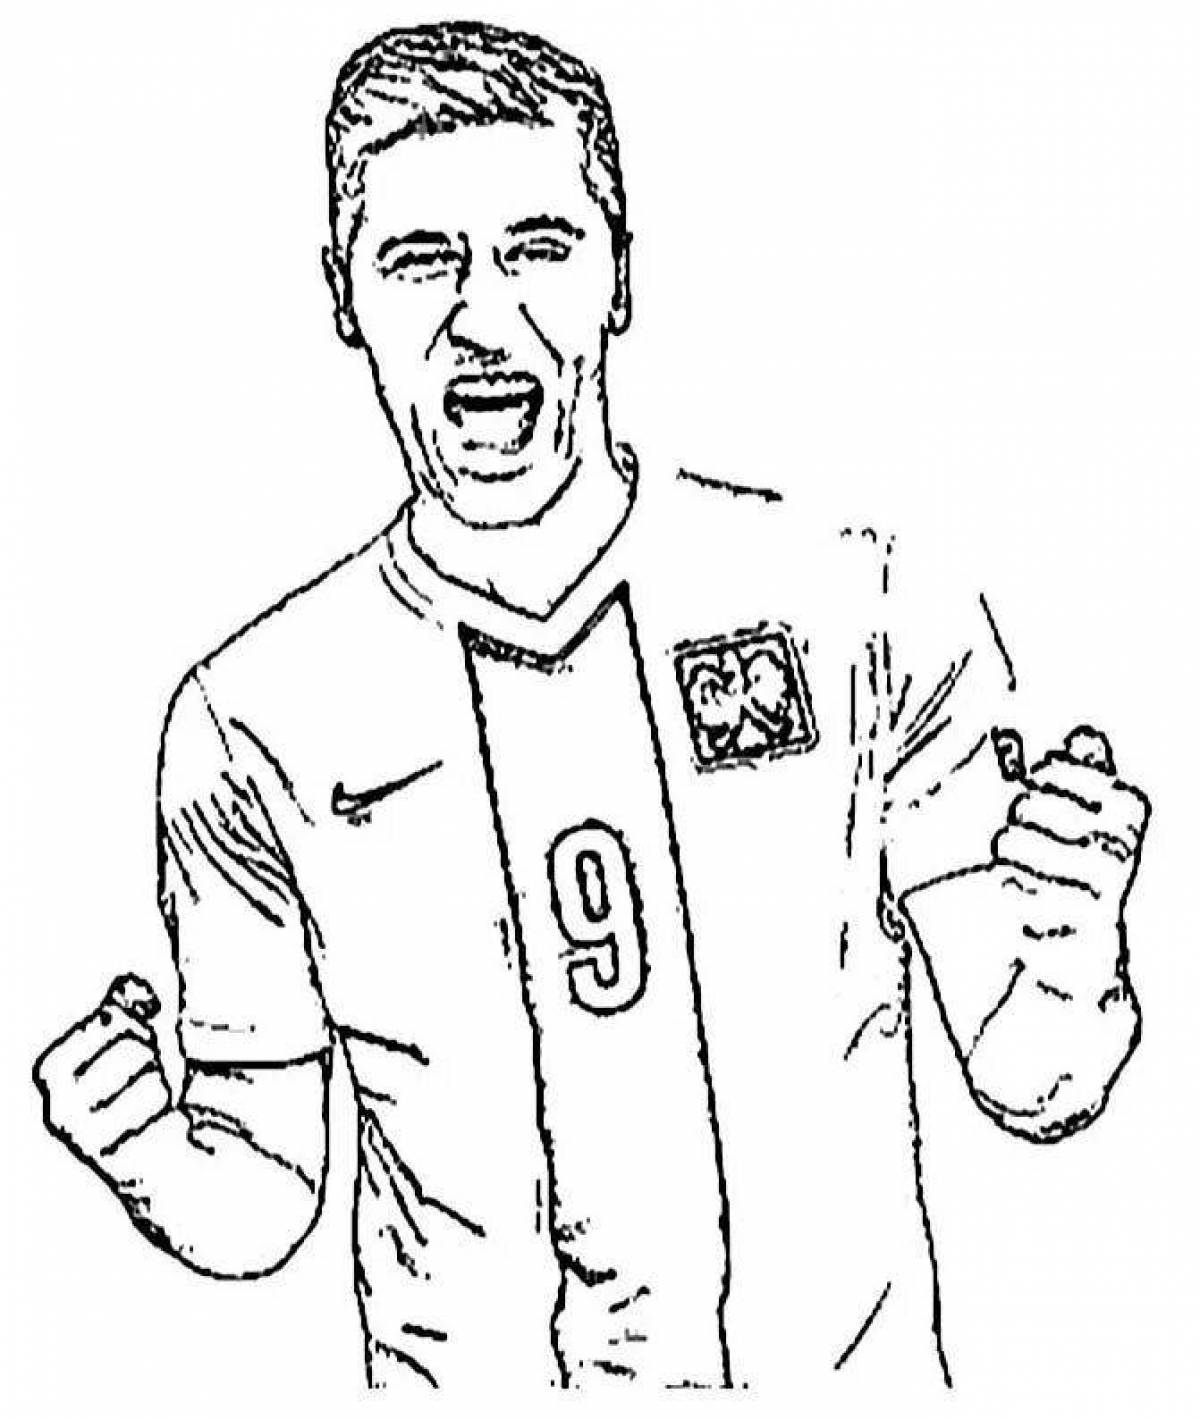 Coloring page intriguing soccer player pele